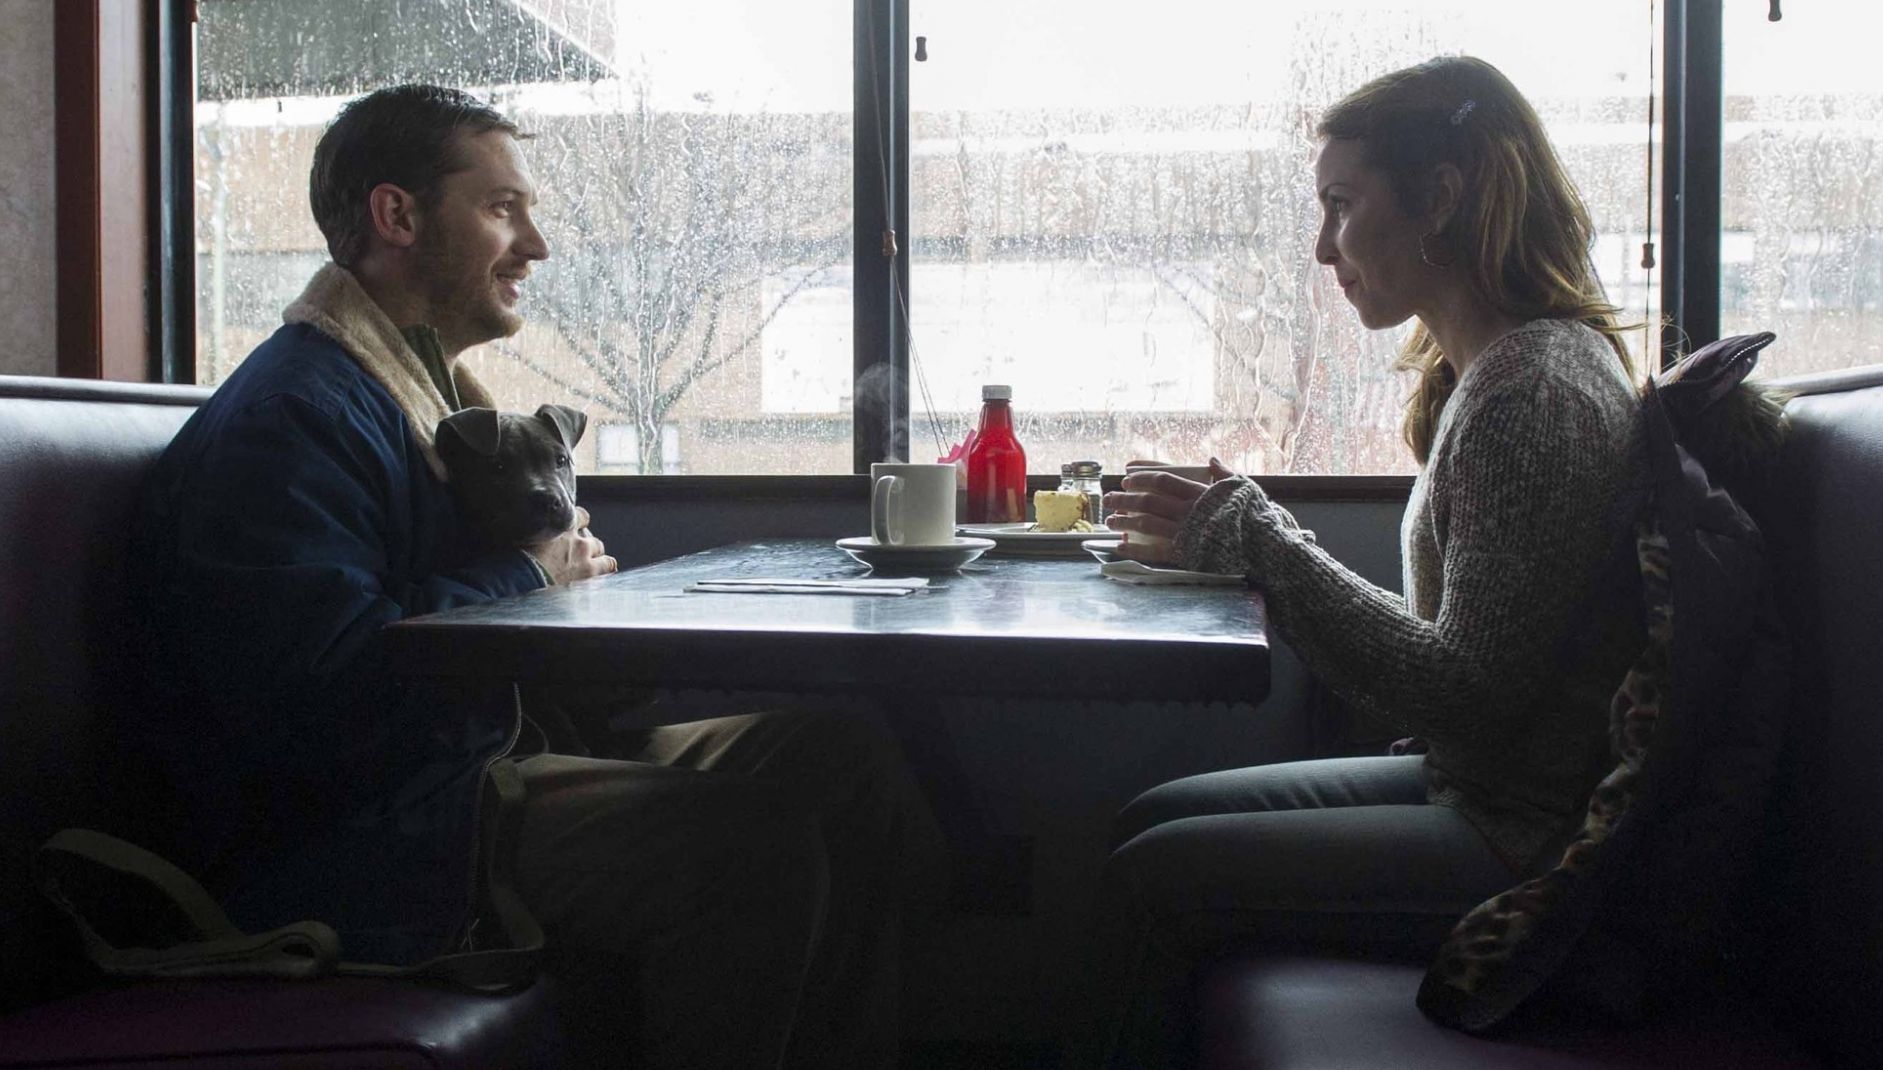 Tom Hardy and Noomi Rapace in diner